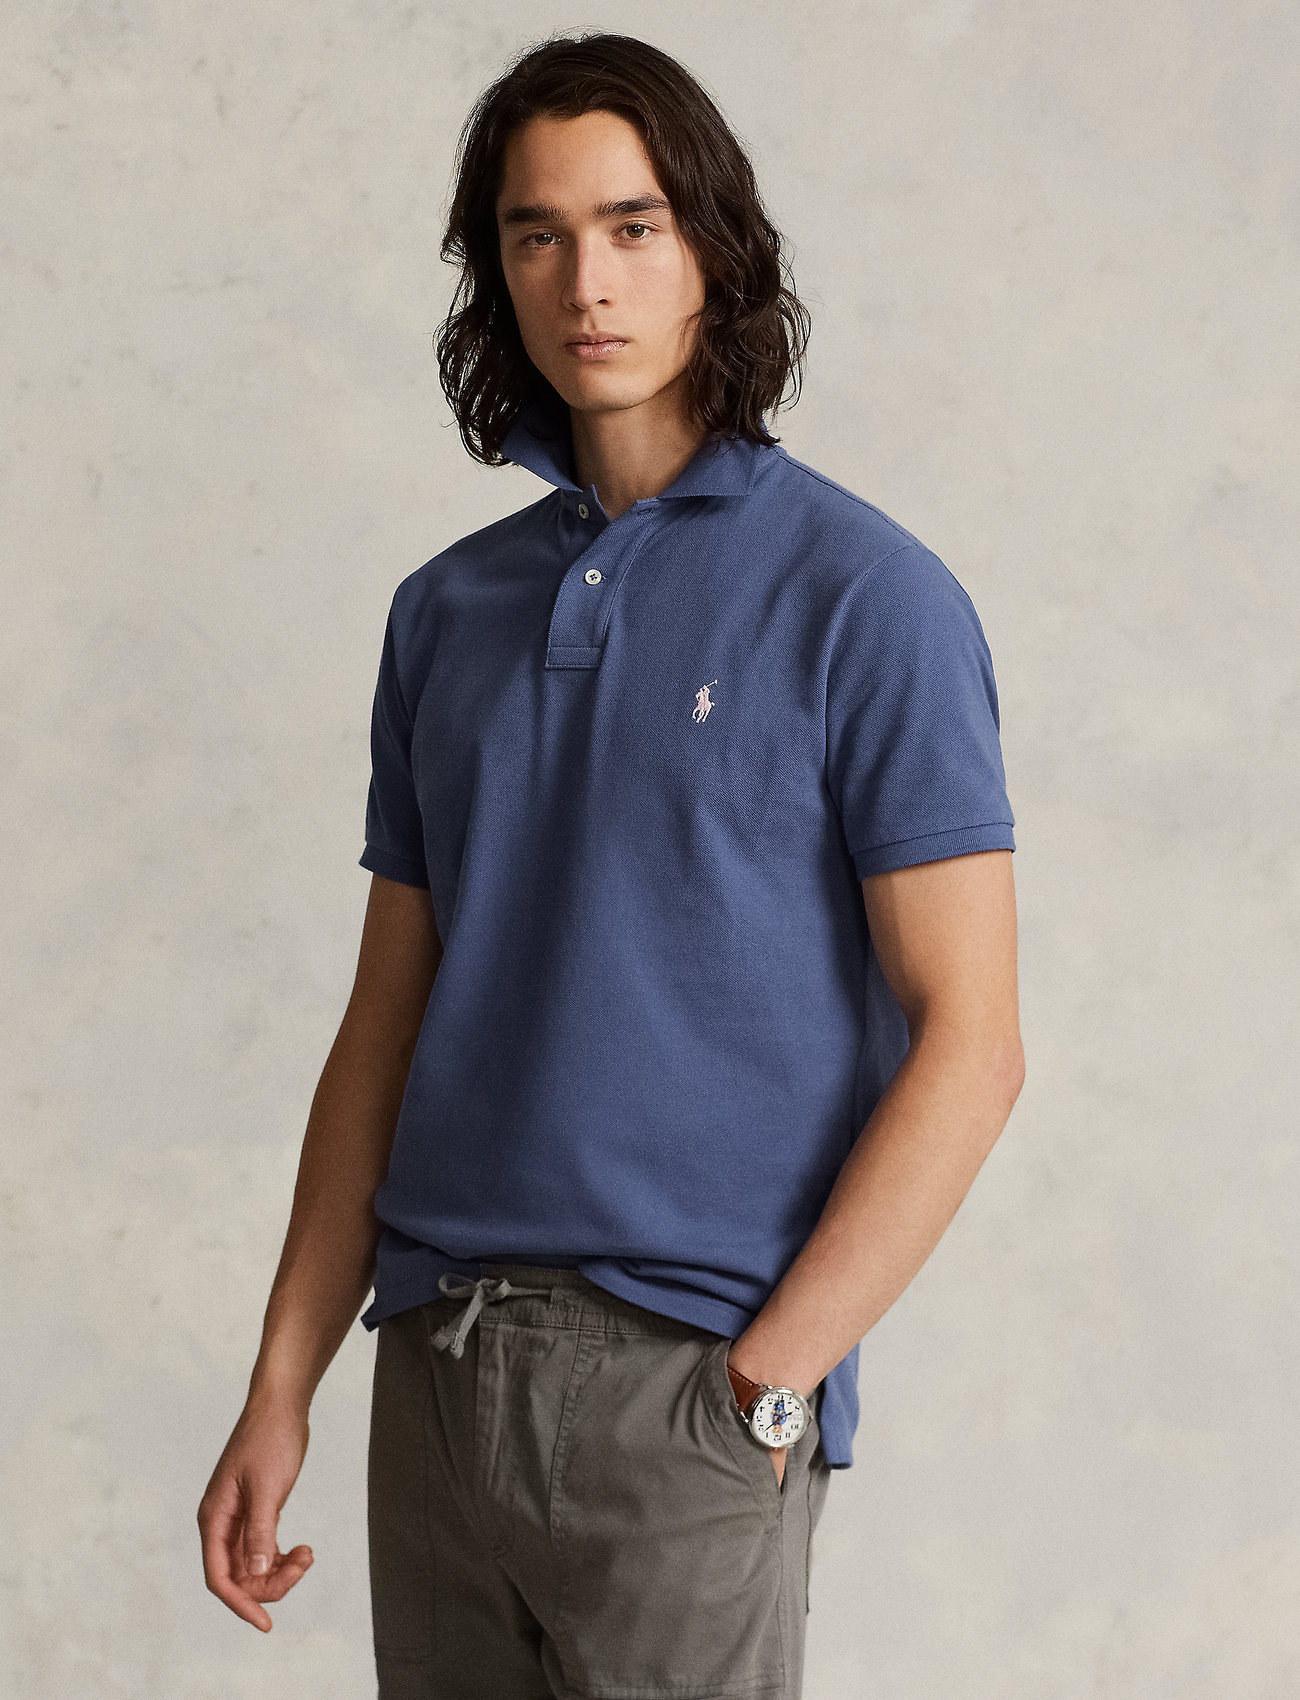 Polo Ralph Lauren - Slim Fit Mesh Polo Shirt - knitted polos - old royal/c3115 - 0